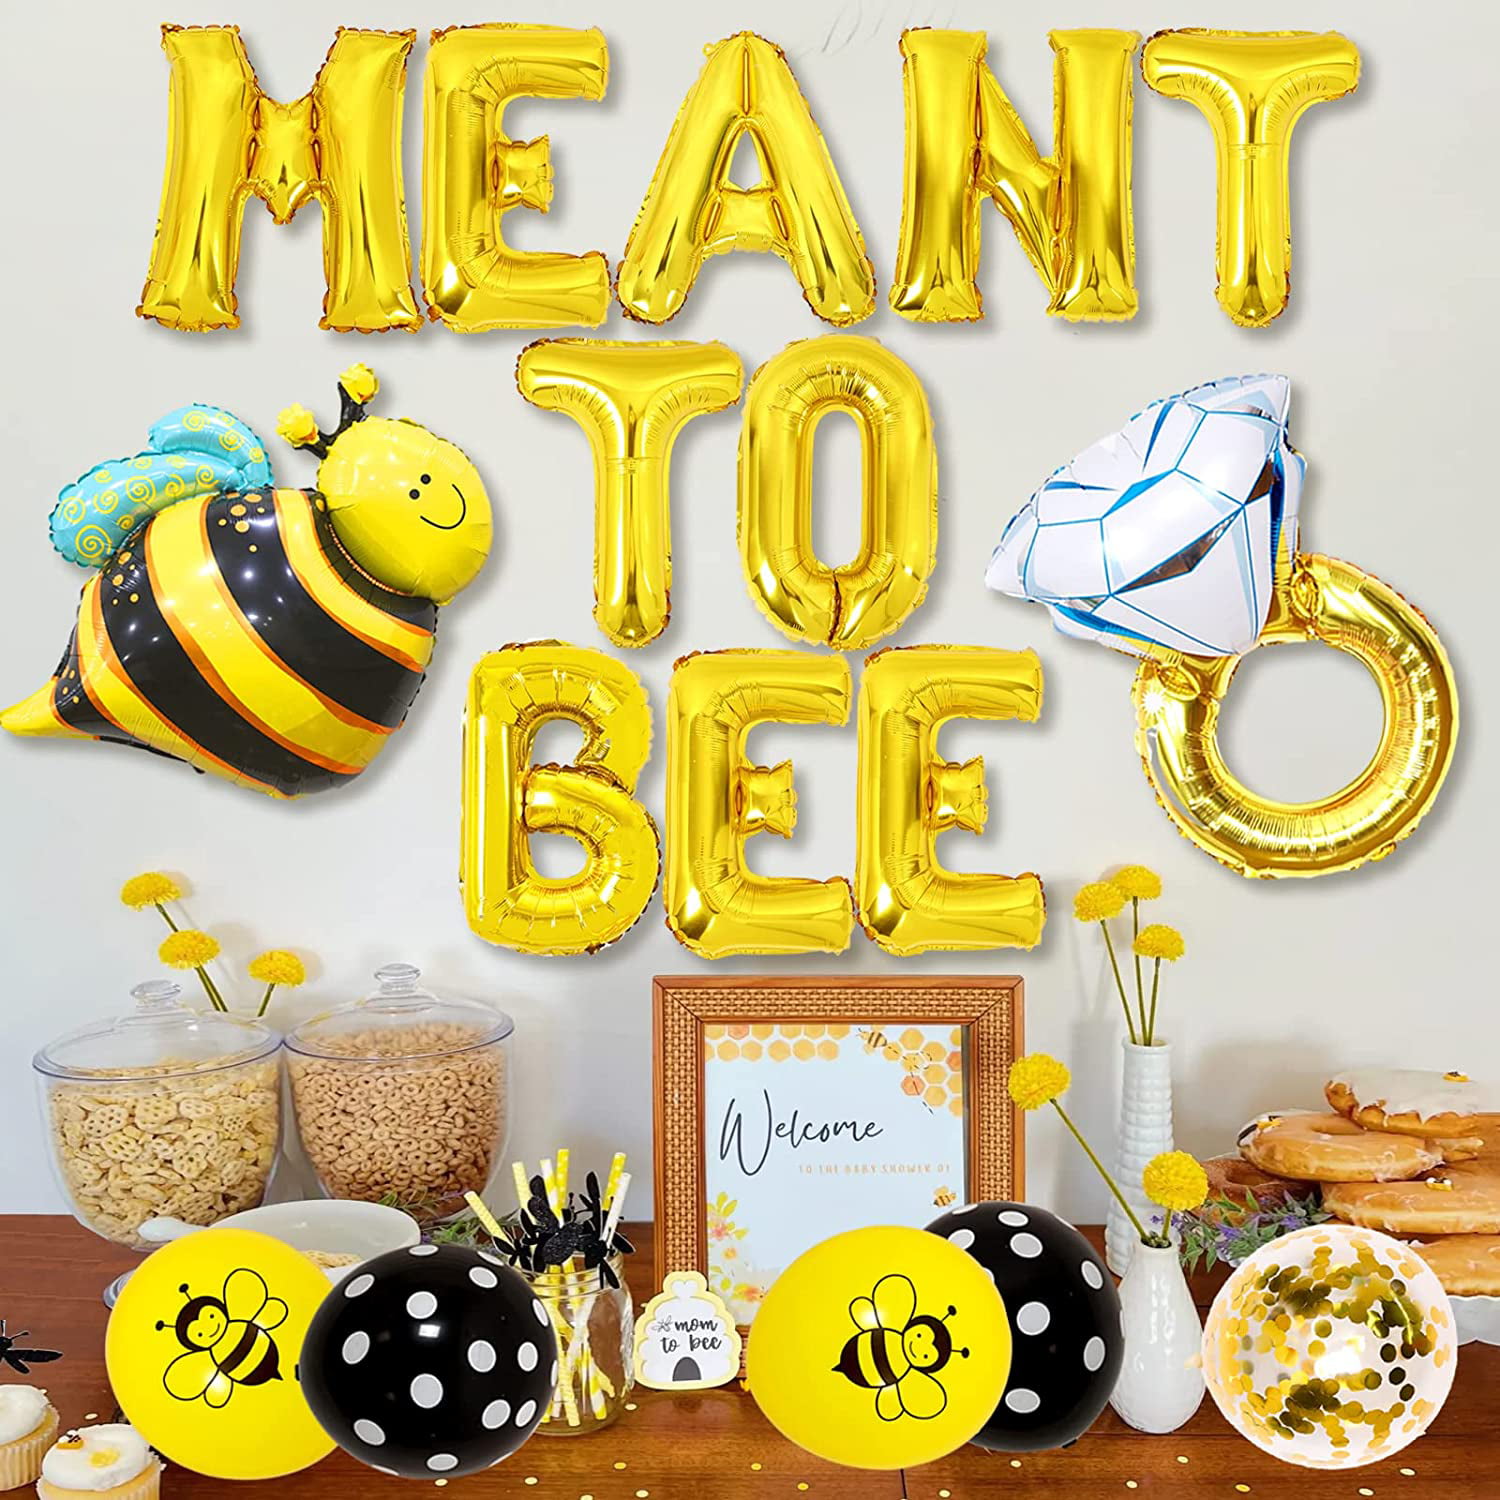 Bee Theme Bridal Shower Decorations “Meant to Bee” Bridal Shower Supplies  Girl Women Bride to Bee, Meant to Bee Bachelorette Decorations with Bee  Shaped Diamond Ring Balloons Bridal Shower Party Decor 